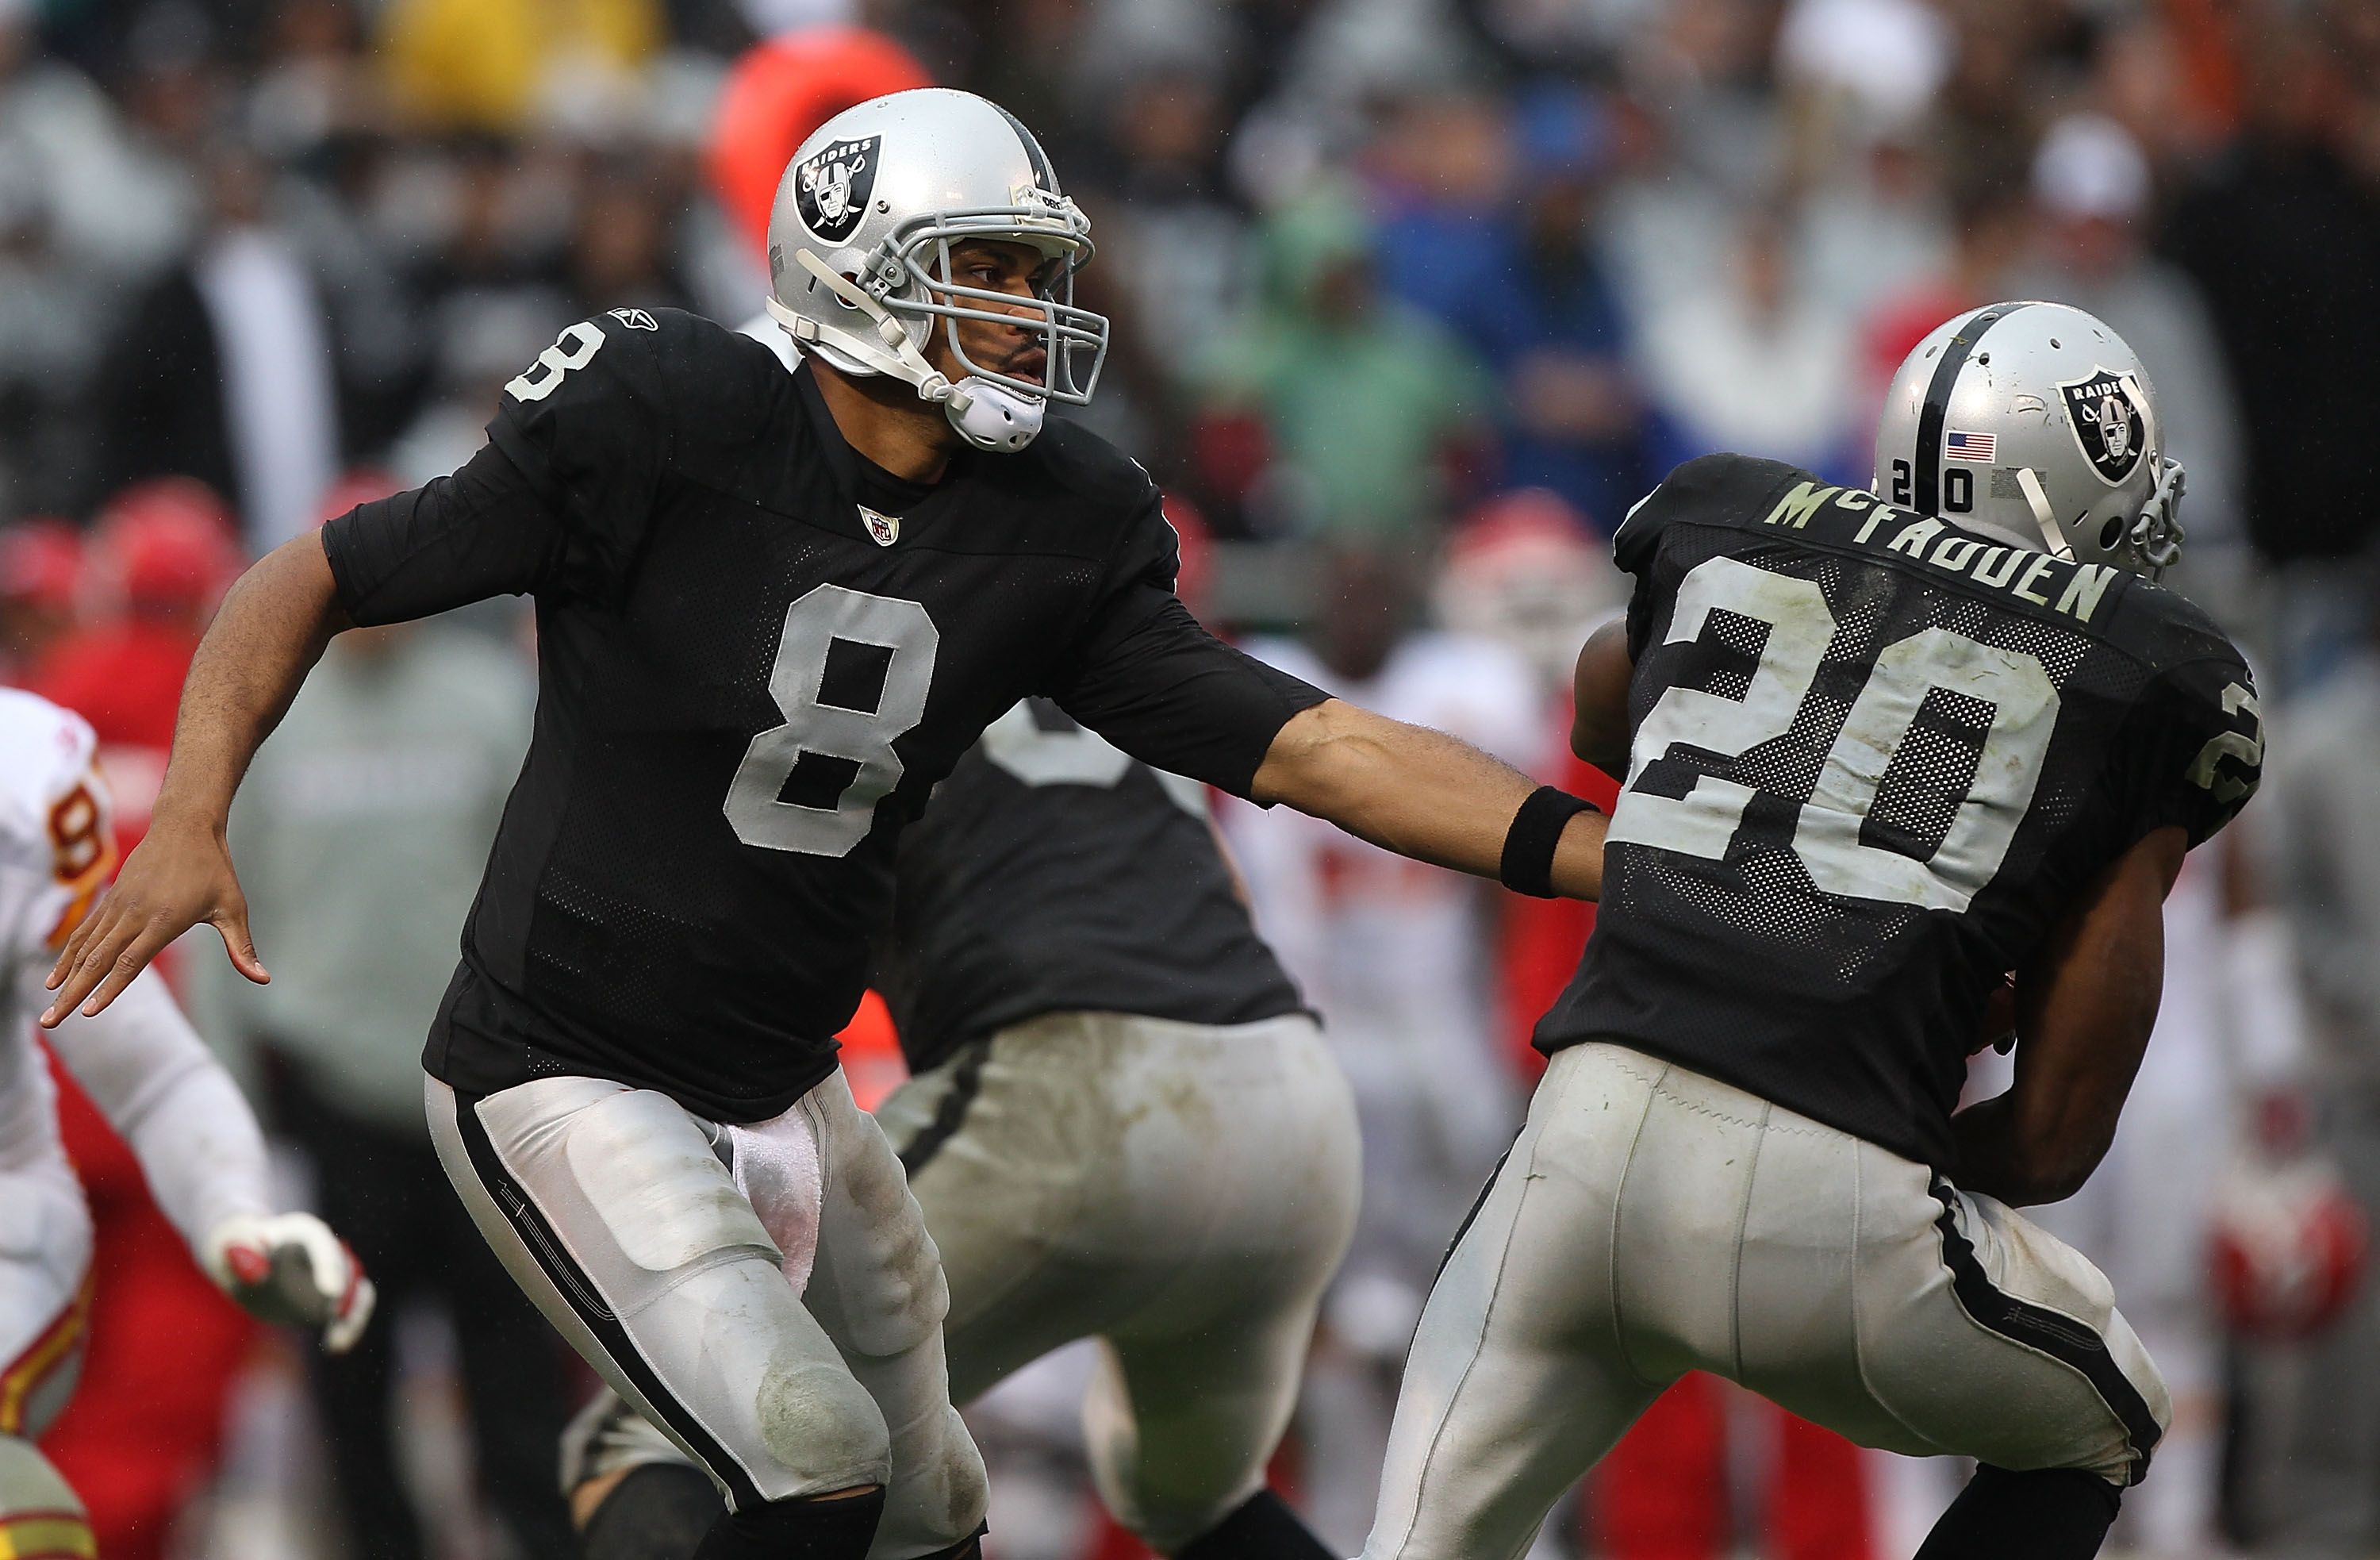 OAKLAND, CA - NOVEMBER 07:  Jason Campbell #8 hands the ball off to Darren McFadden #20 of the Oakland Raiders against the Kansas City Chiefs during an NFL game at Oakland-Alameda County Coliseum on November 7, 2010 in Oakland, California.  (Photo by Jed